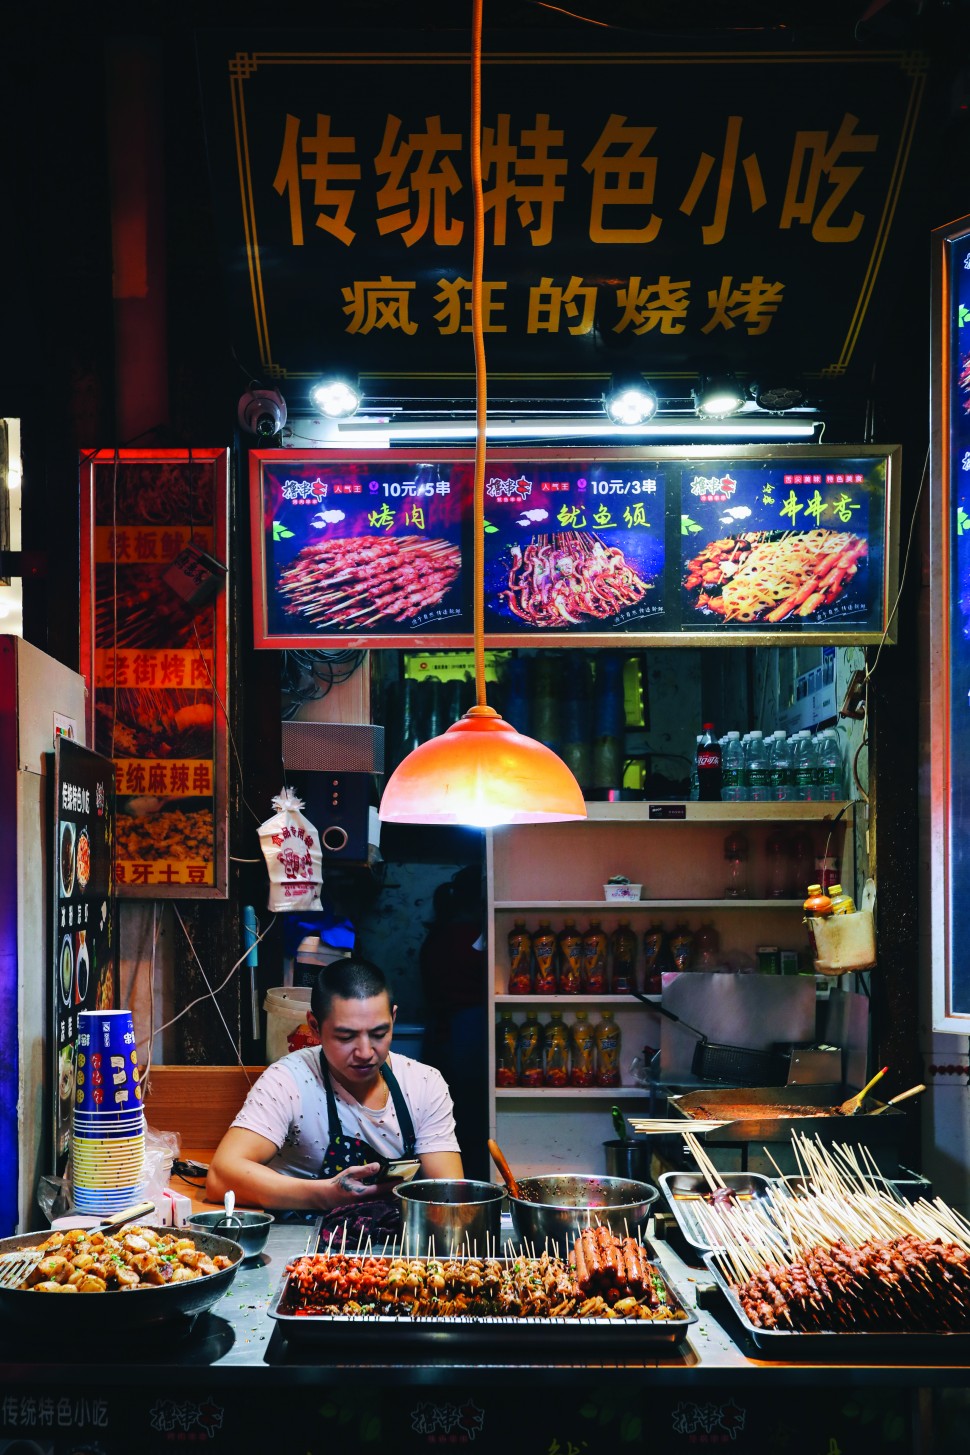 Chongqing is known for their fire-breathing spicy delicacies, including these meat skewers that are easily found on streetside stalls an peddlers